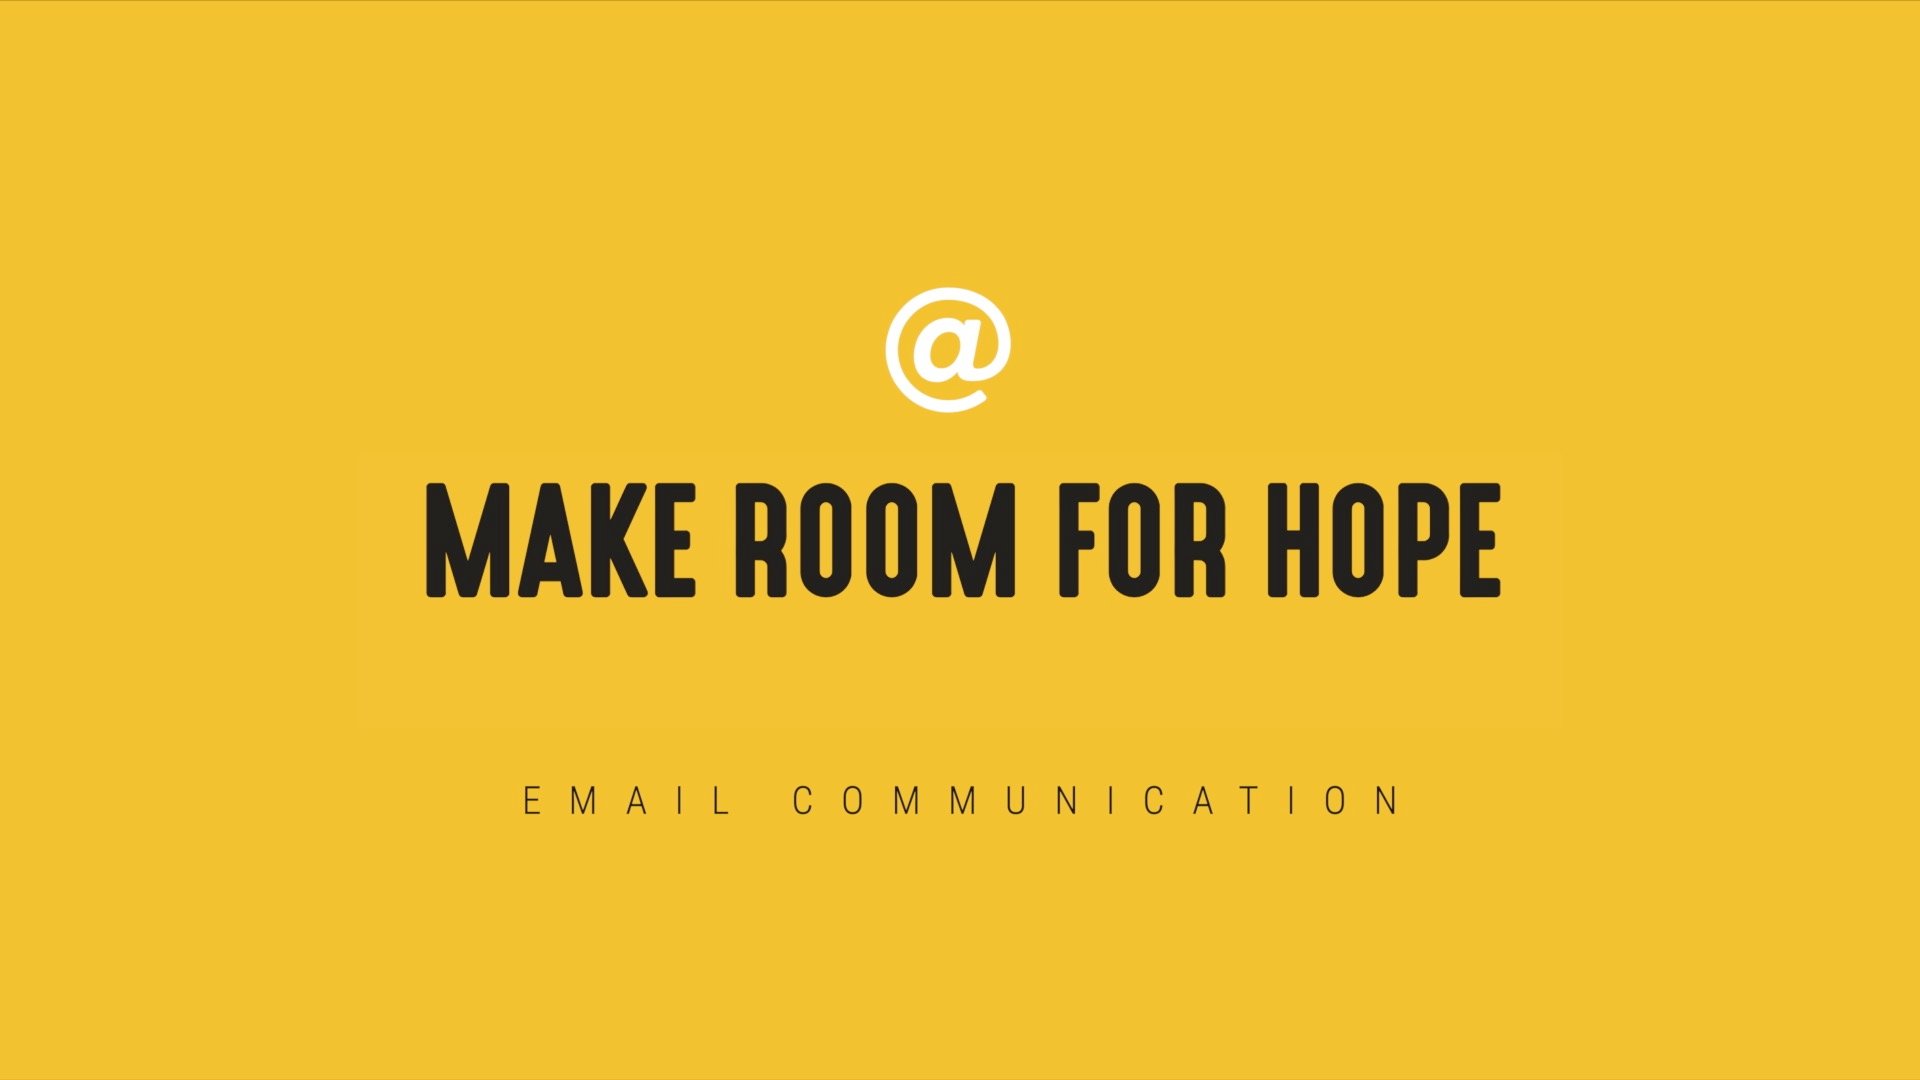 [NEW] Make Room For Hope - Timely Email